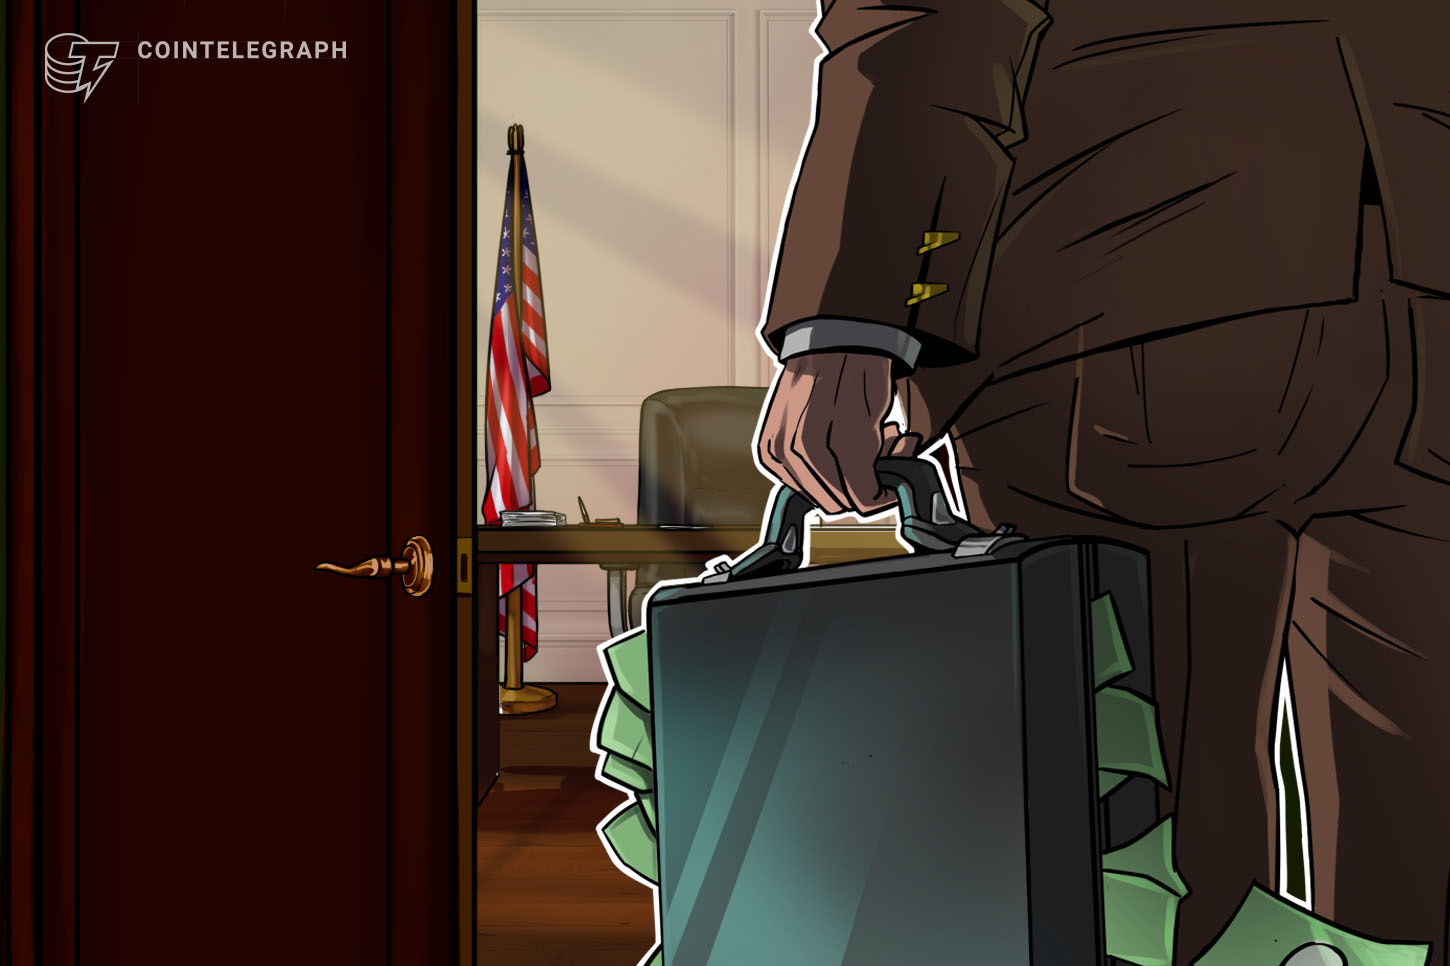 BitMEX founder and ex-CTO out on $5M bail bond till court docket look